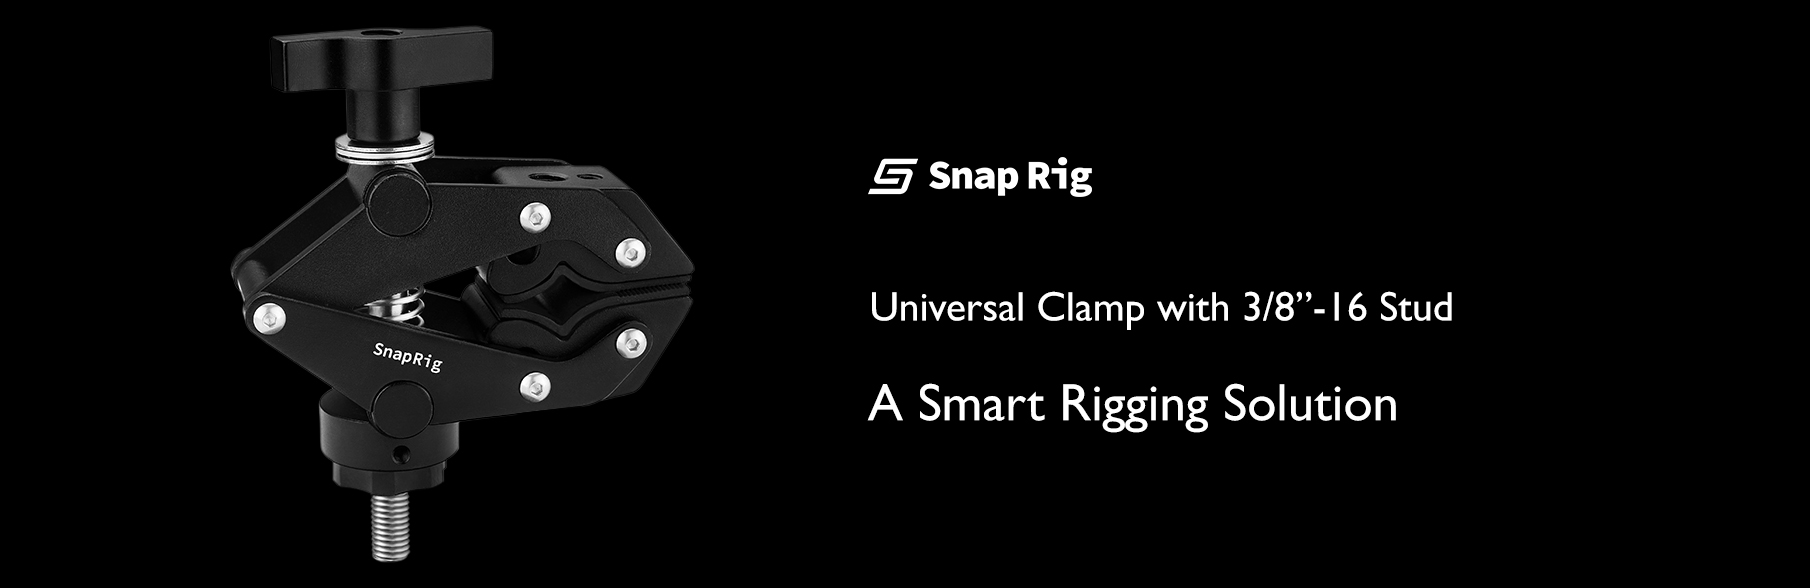 Proaim Snaprig Universal Clamp with 3/8″-16 Threaded Stud| Fits 60mm Speed Rails/Scaffold Tubes